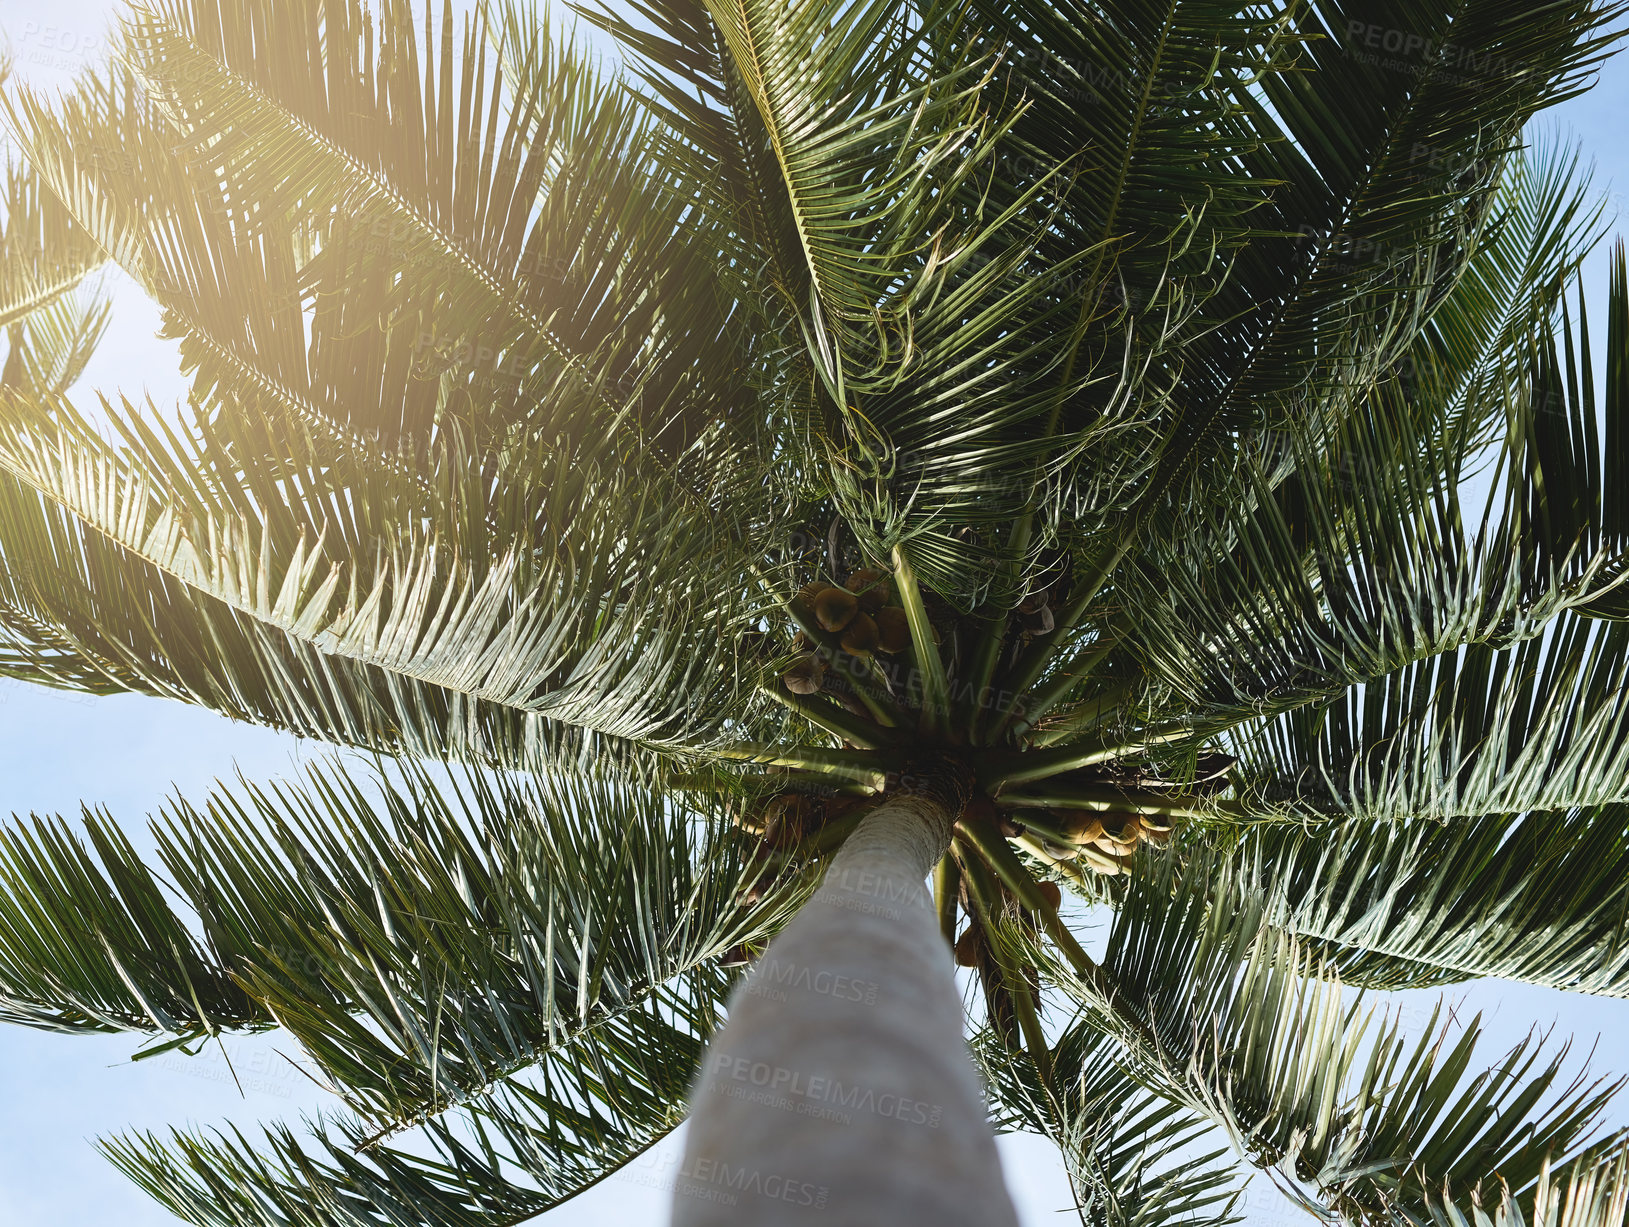 Buy stock photo Low angle shot of a palm tree with its leaves blowing in the wind